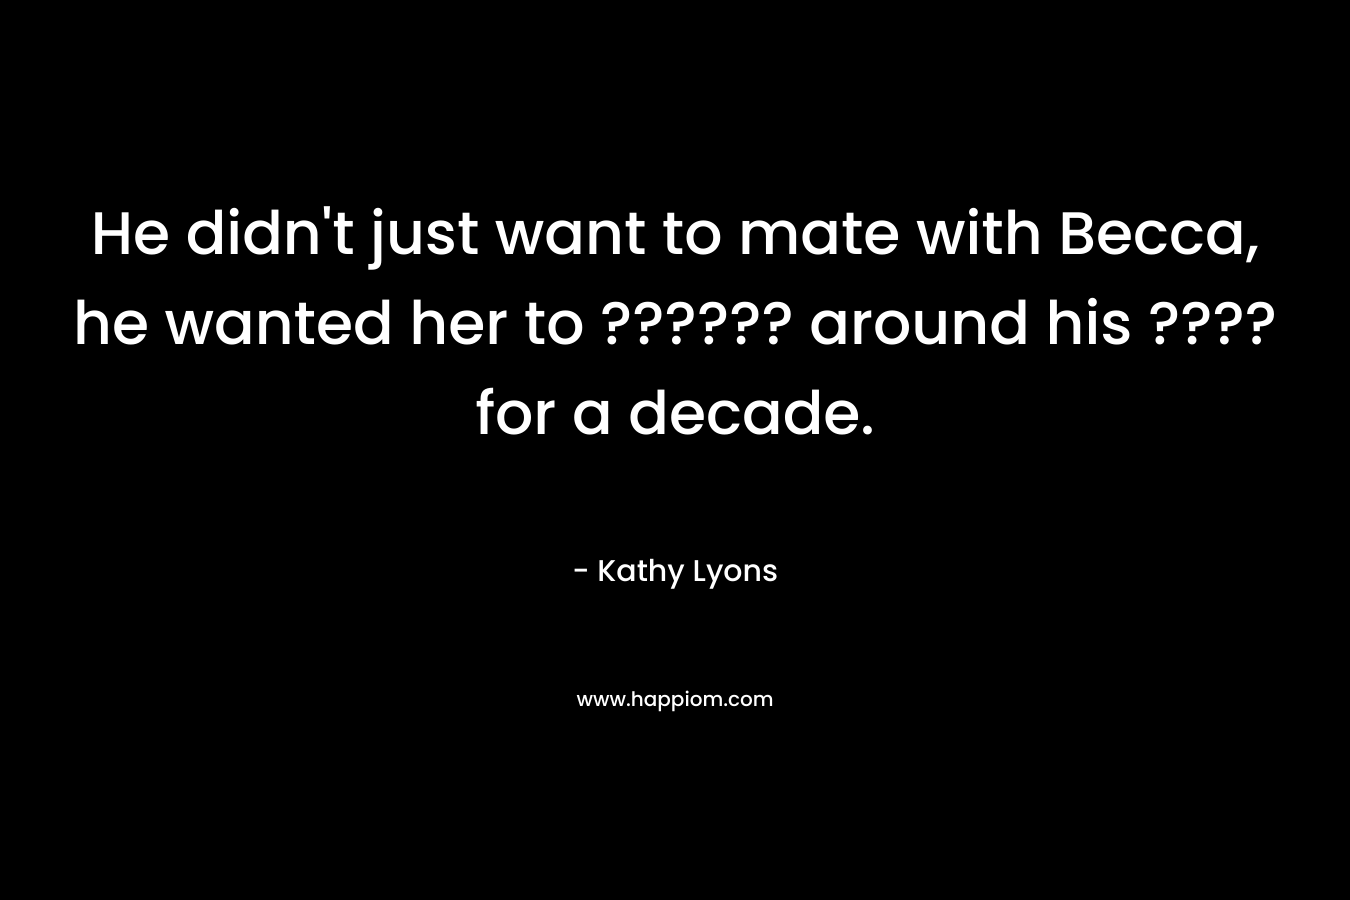 He didn't just want to mate with Becca, he wanted her to ?????? around his ???? for a decade.